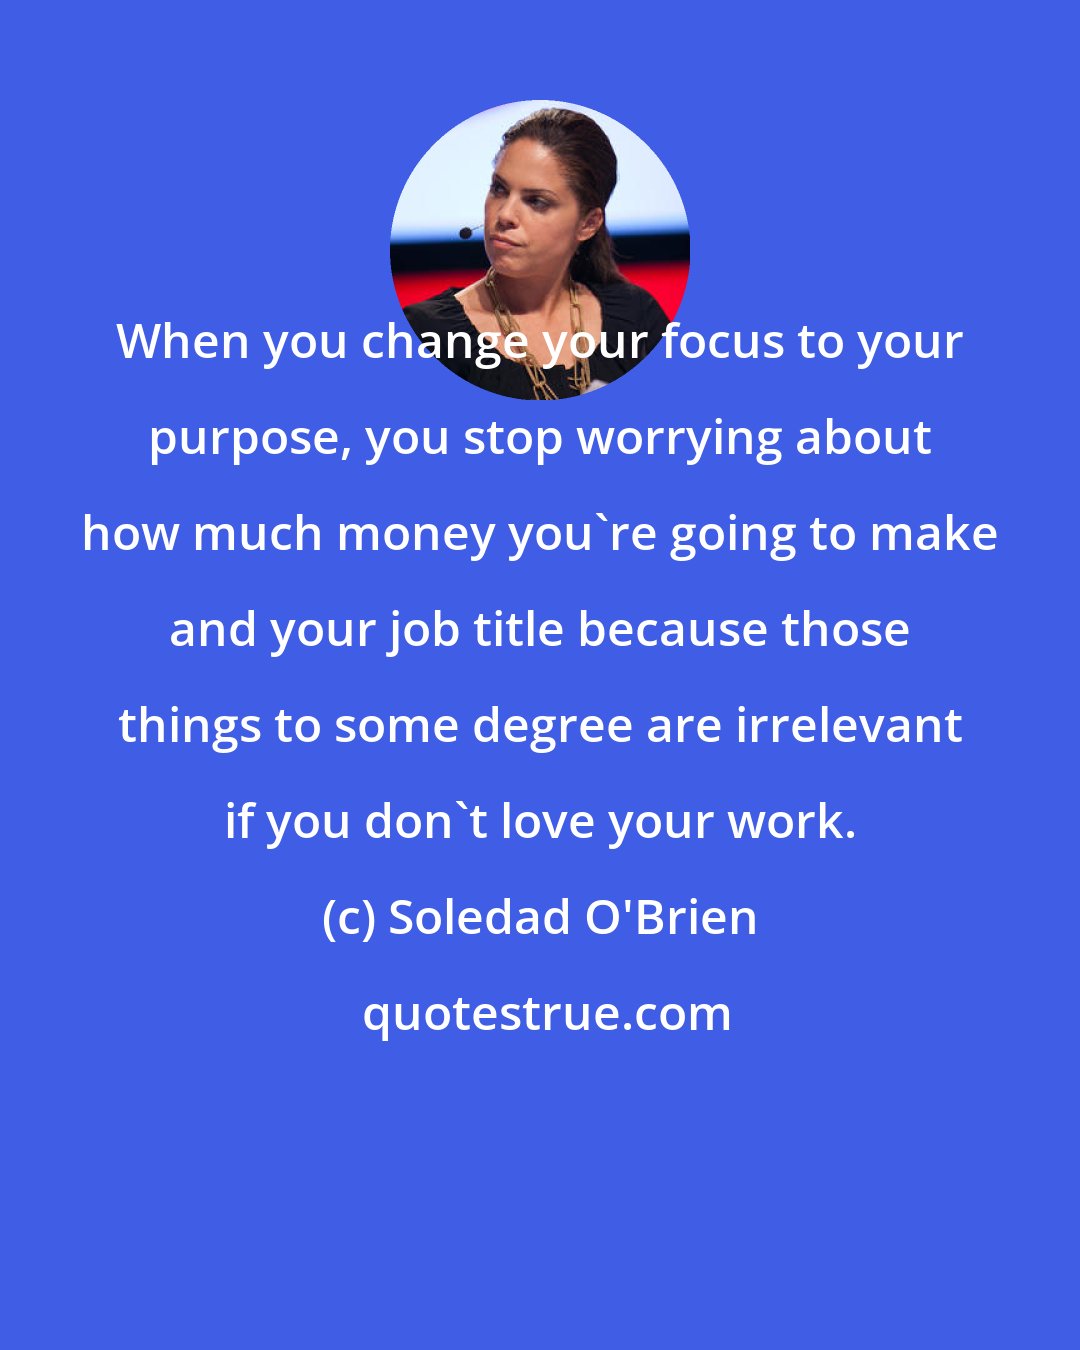 Soledad O'Brien: When you change your focus to your purpose, you stop worrying about how much money you're going to make and your job title because those things to some degree are irrelevant if you don't love your work.